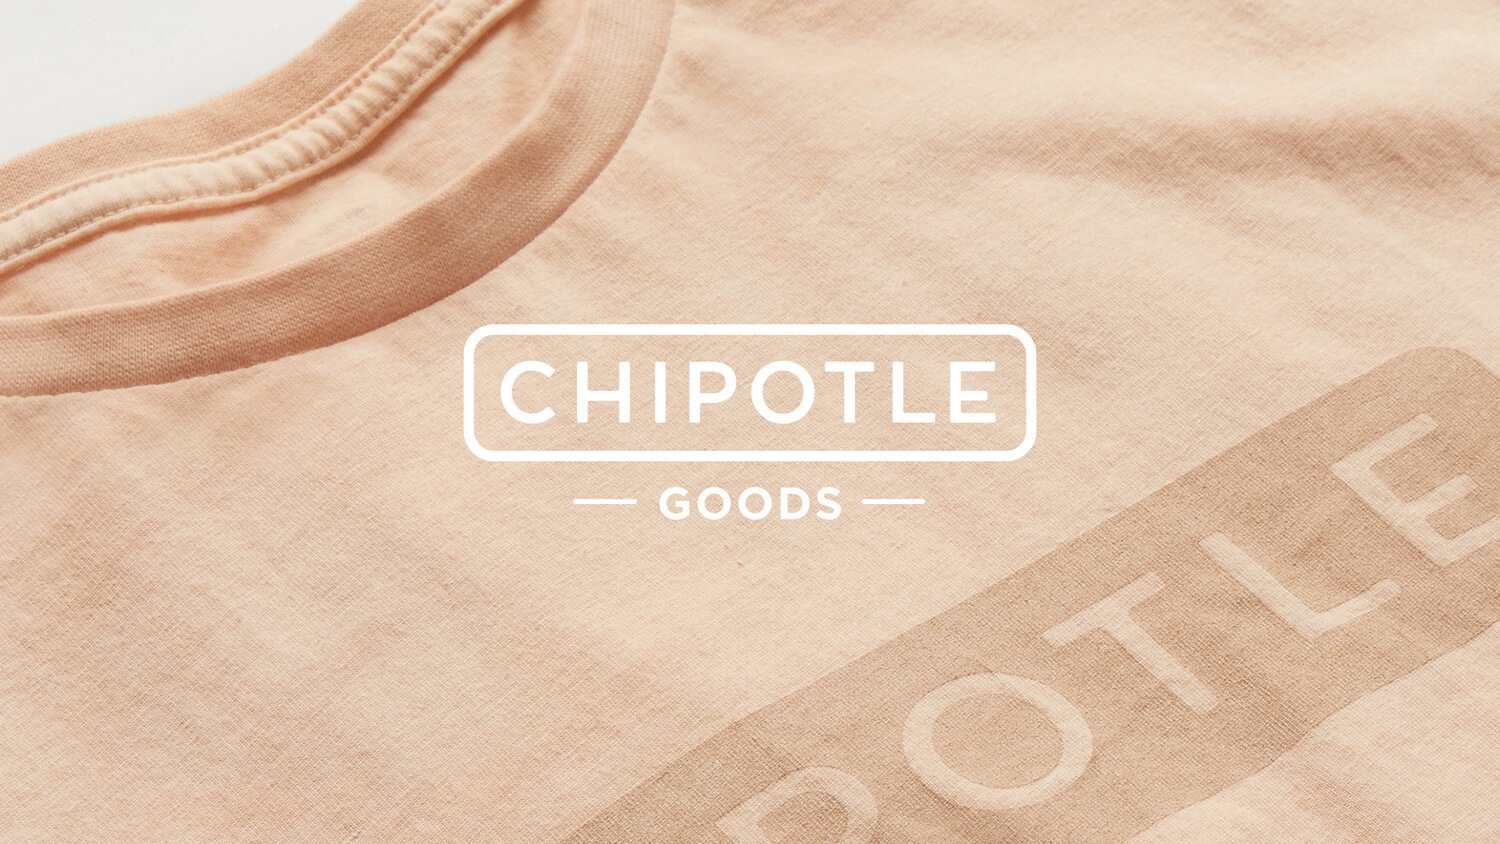 Up close of dyed Chipotle shirt with logo. August 2020